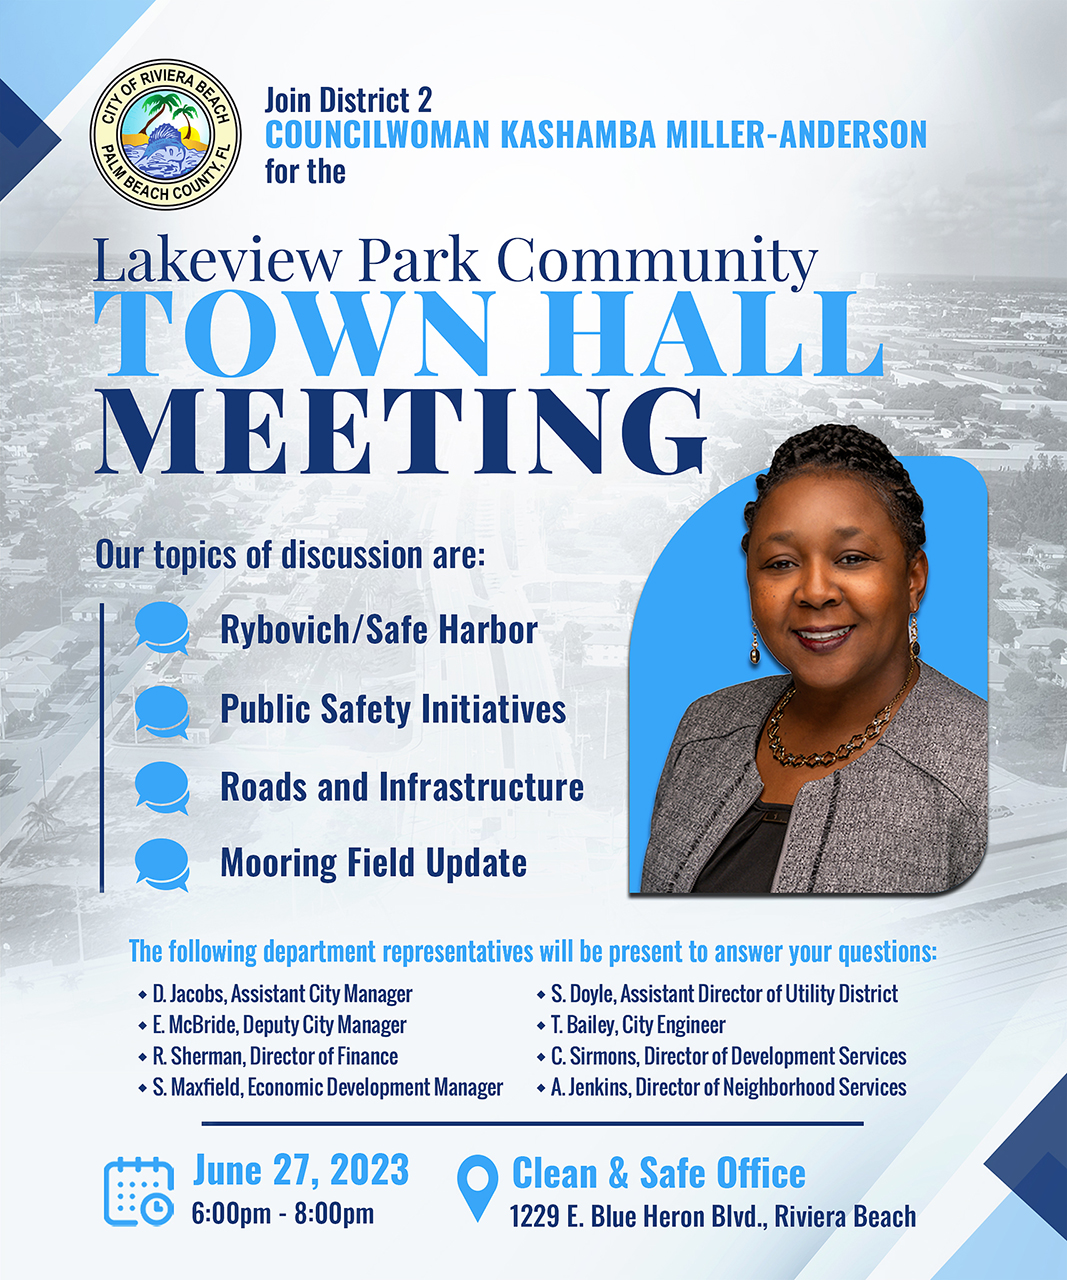 Join District 2 COUNCILWOMAN KASHAMBA MILLER-ANDERSON for the ? BEACH COU Lakeview Park Community TOWN HALL MEETING Our topics of discussion are: Rybovich/Safe Harbor Public Safety Initiatives Roads and Infrastructure Mooring Field Update The following department representatives will be present to answer your questions: • D. Jacobs, Assistant City Manager • S. Doyle, Assistant Director of Utility District • E. McBride, Deputy City Manager • T. Bailey, City Engineer • R. Sherman, Director of Finance • C. Sirmons, Director of Development Services • S. Maxfield, Economic Development Manager • A. Jenkins, Director of Neighborhood Services June 27, 2023 6:00pm - 8:00pm Clean & Safe Office 1229 E. Blue Heron Blvd., Riviera Beach